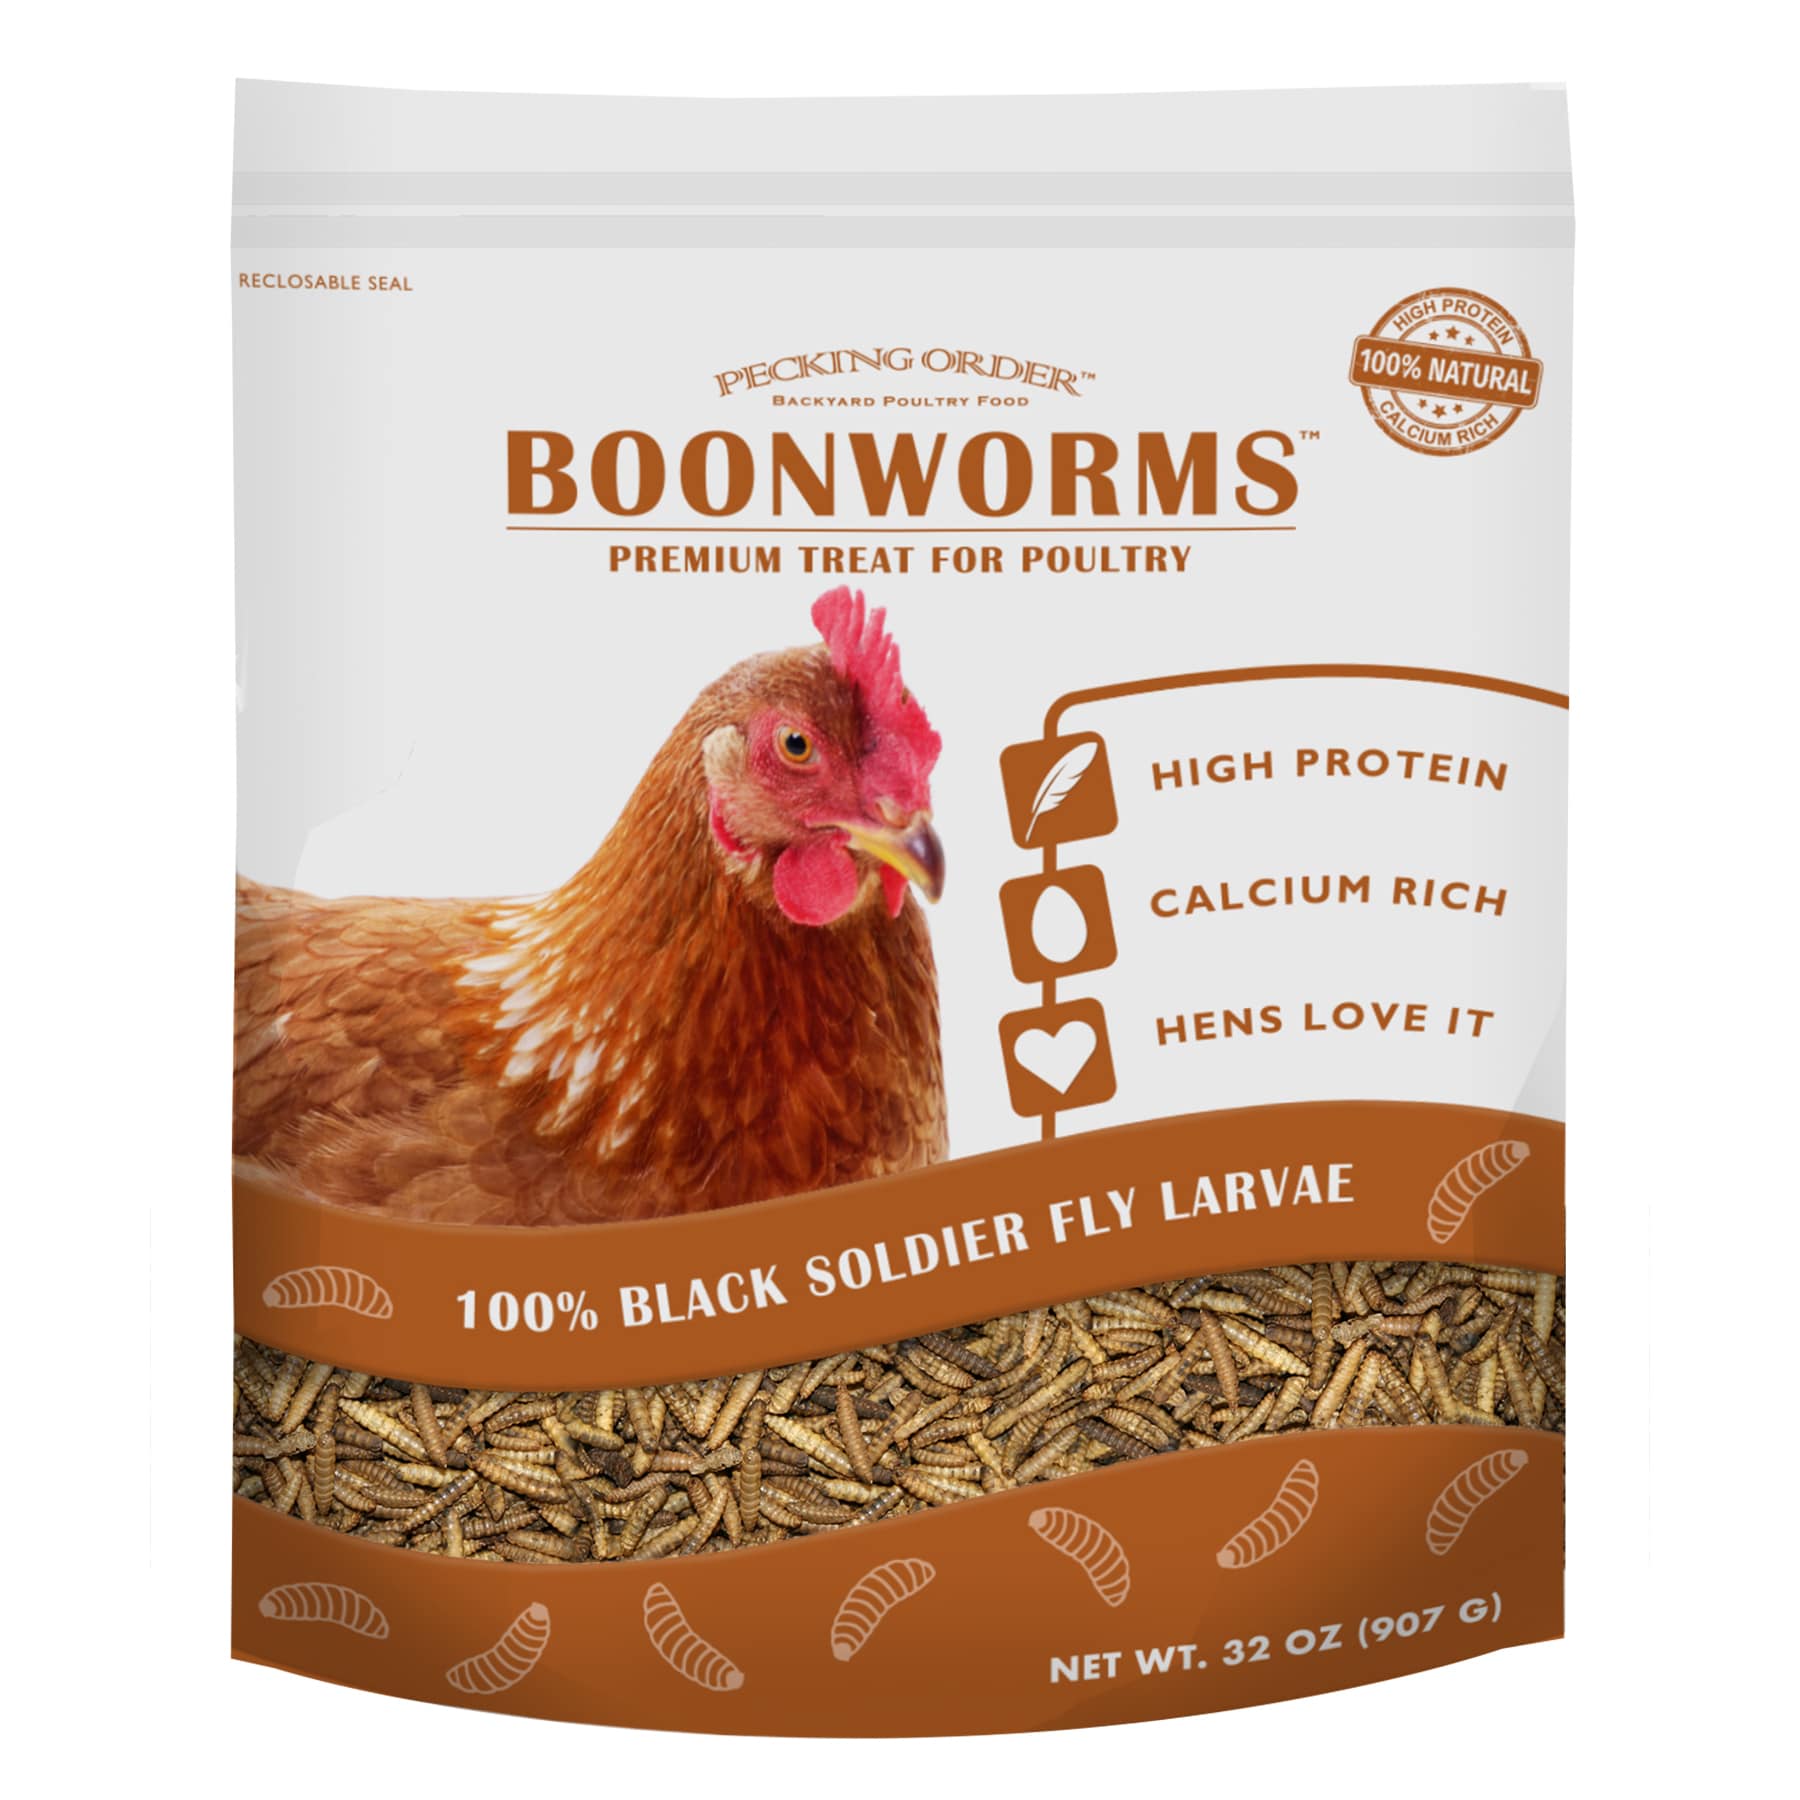 Pecking Order Worms Poultry Treat 32-oz